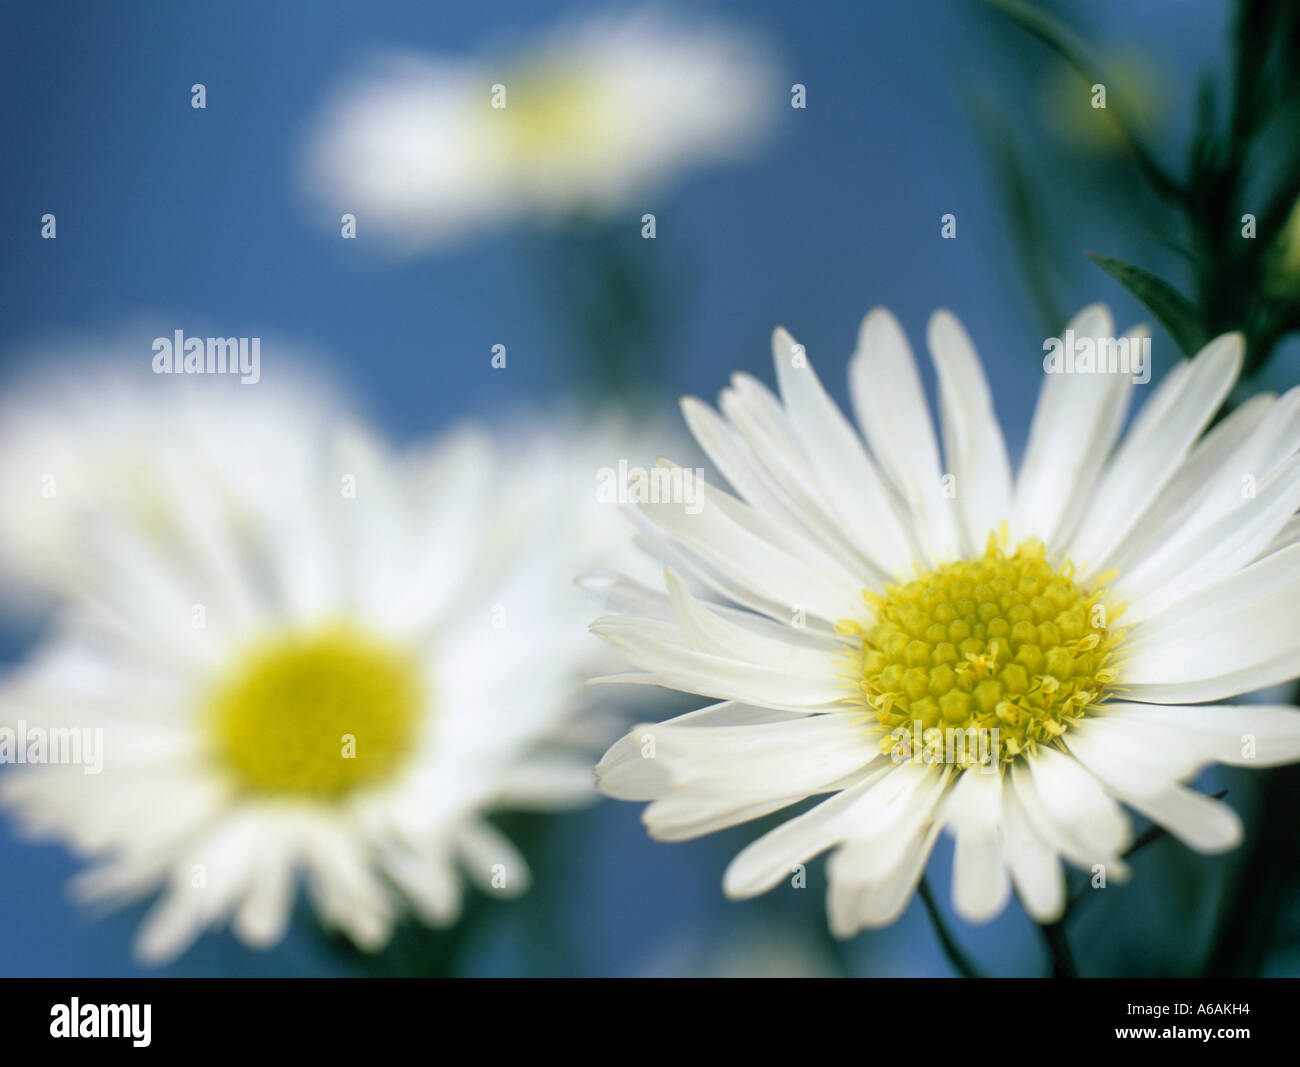 White Michaelmas Daisies 'Aster novi belgii' focused on foreground flower in close up against a blue background Stock Photo